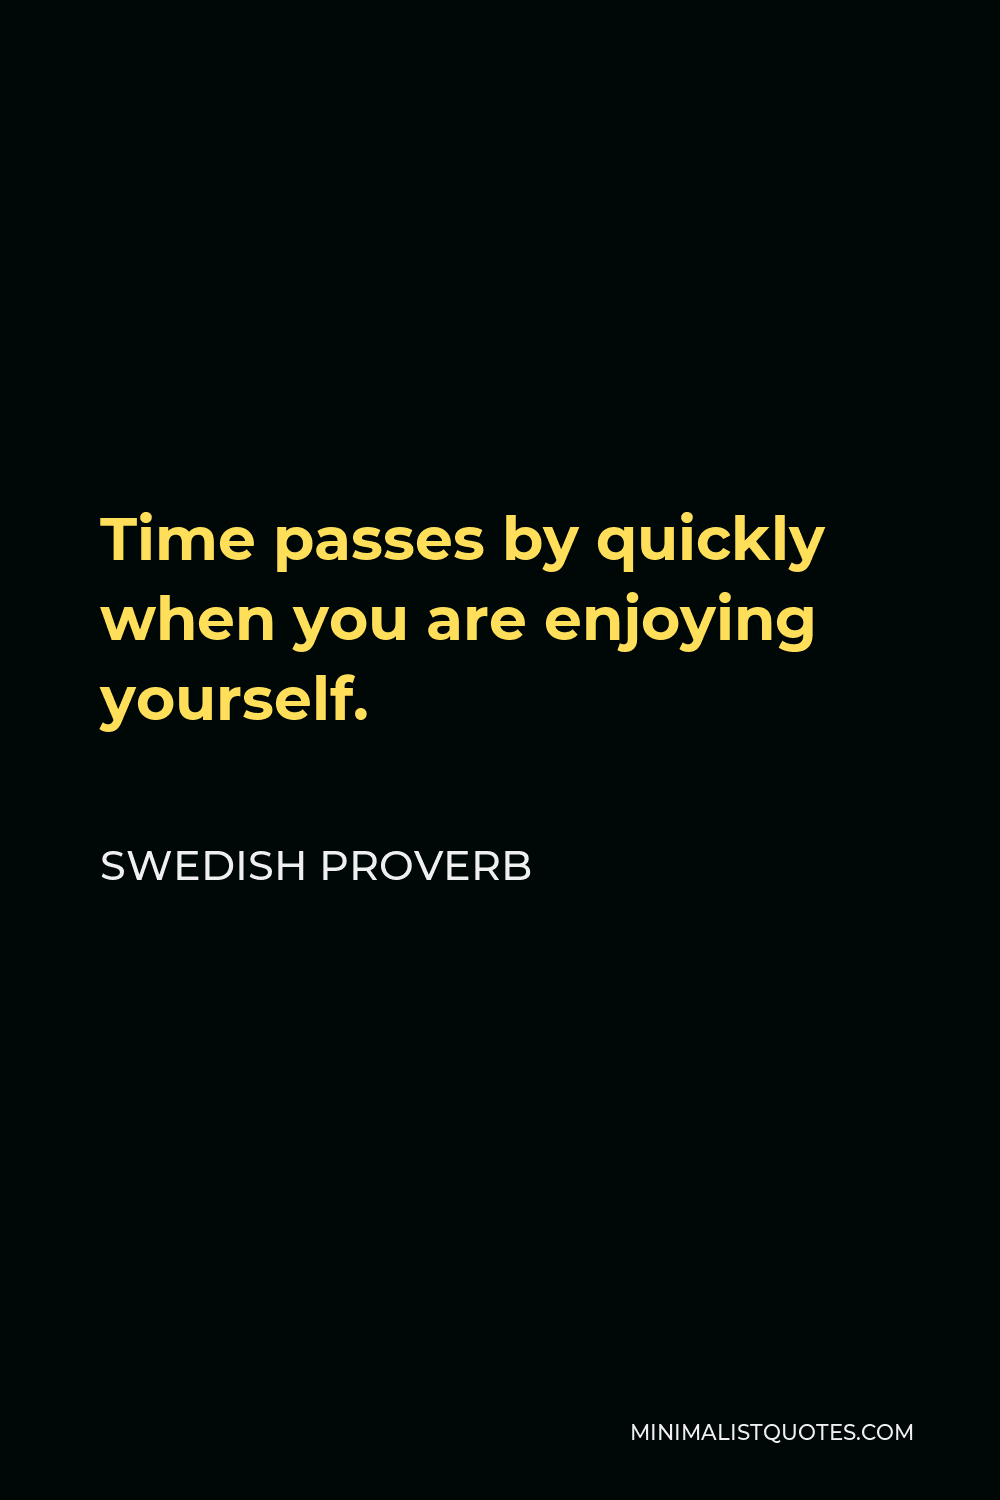 Swedish Proverb Quote - Time passes by quickly when you are enjoying yourself.